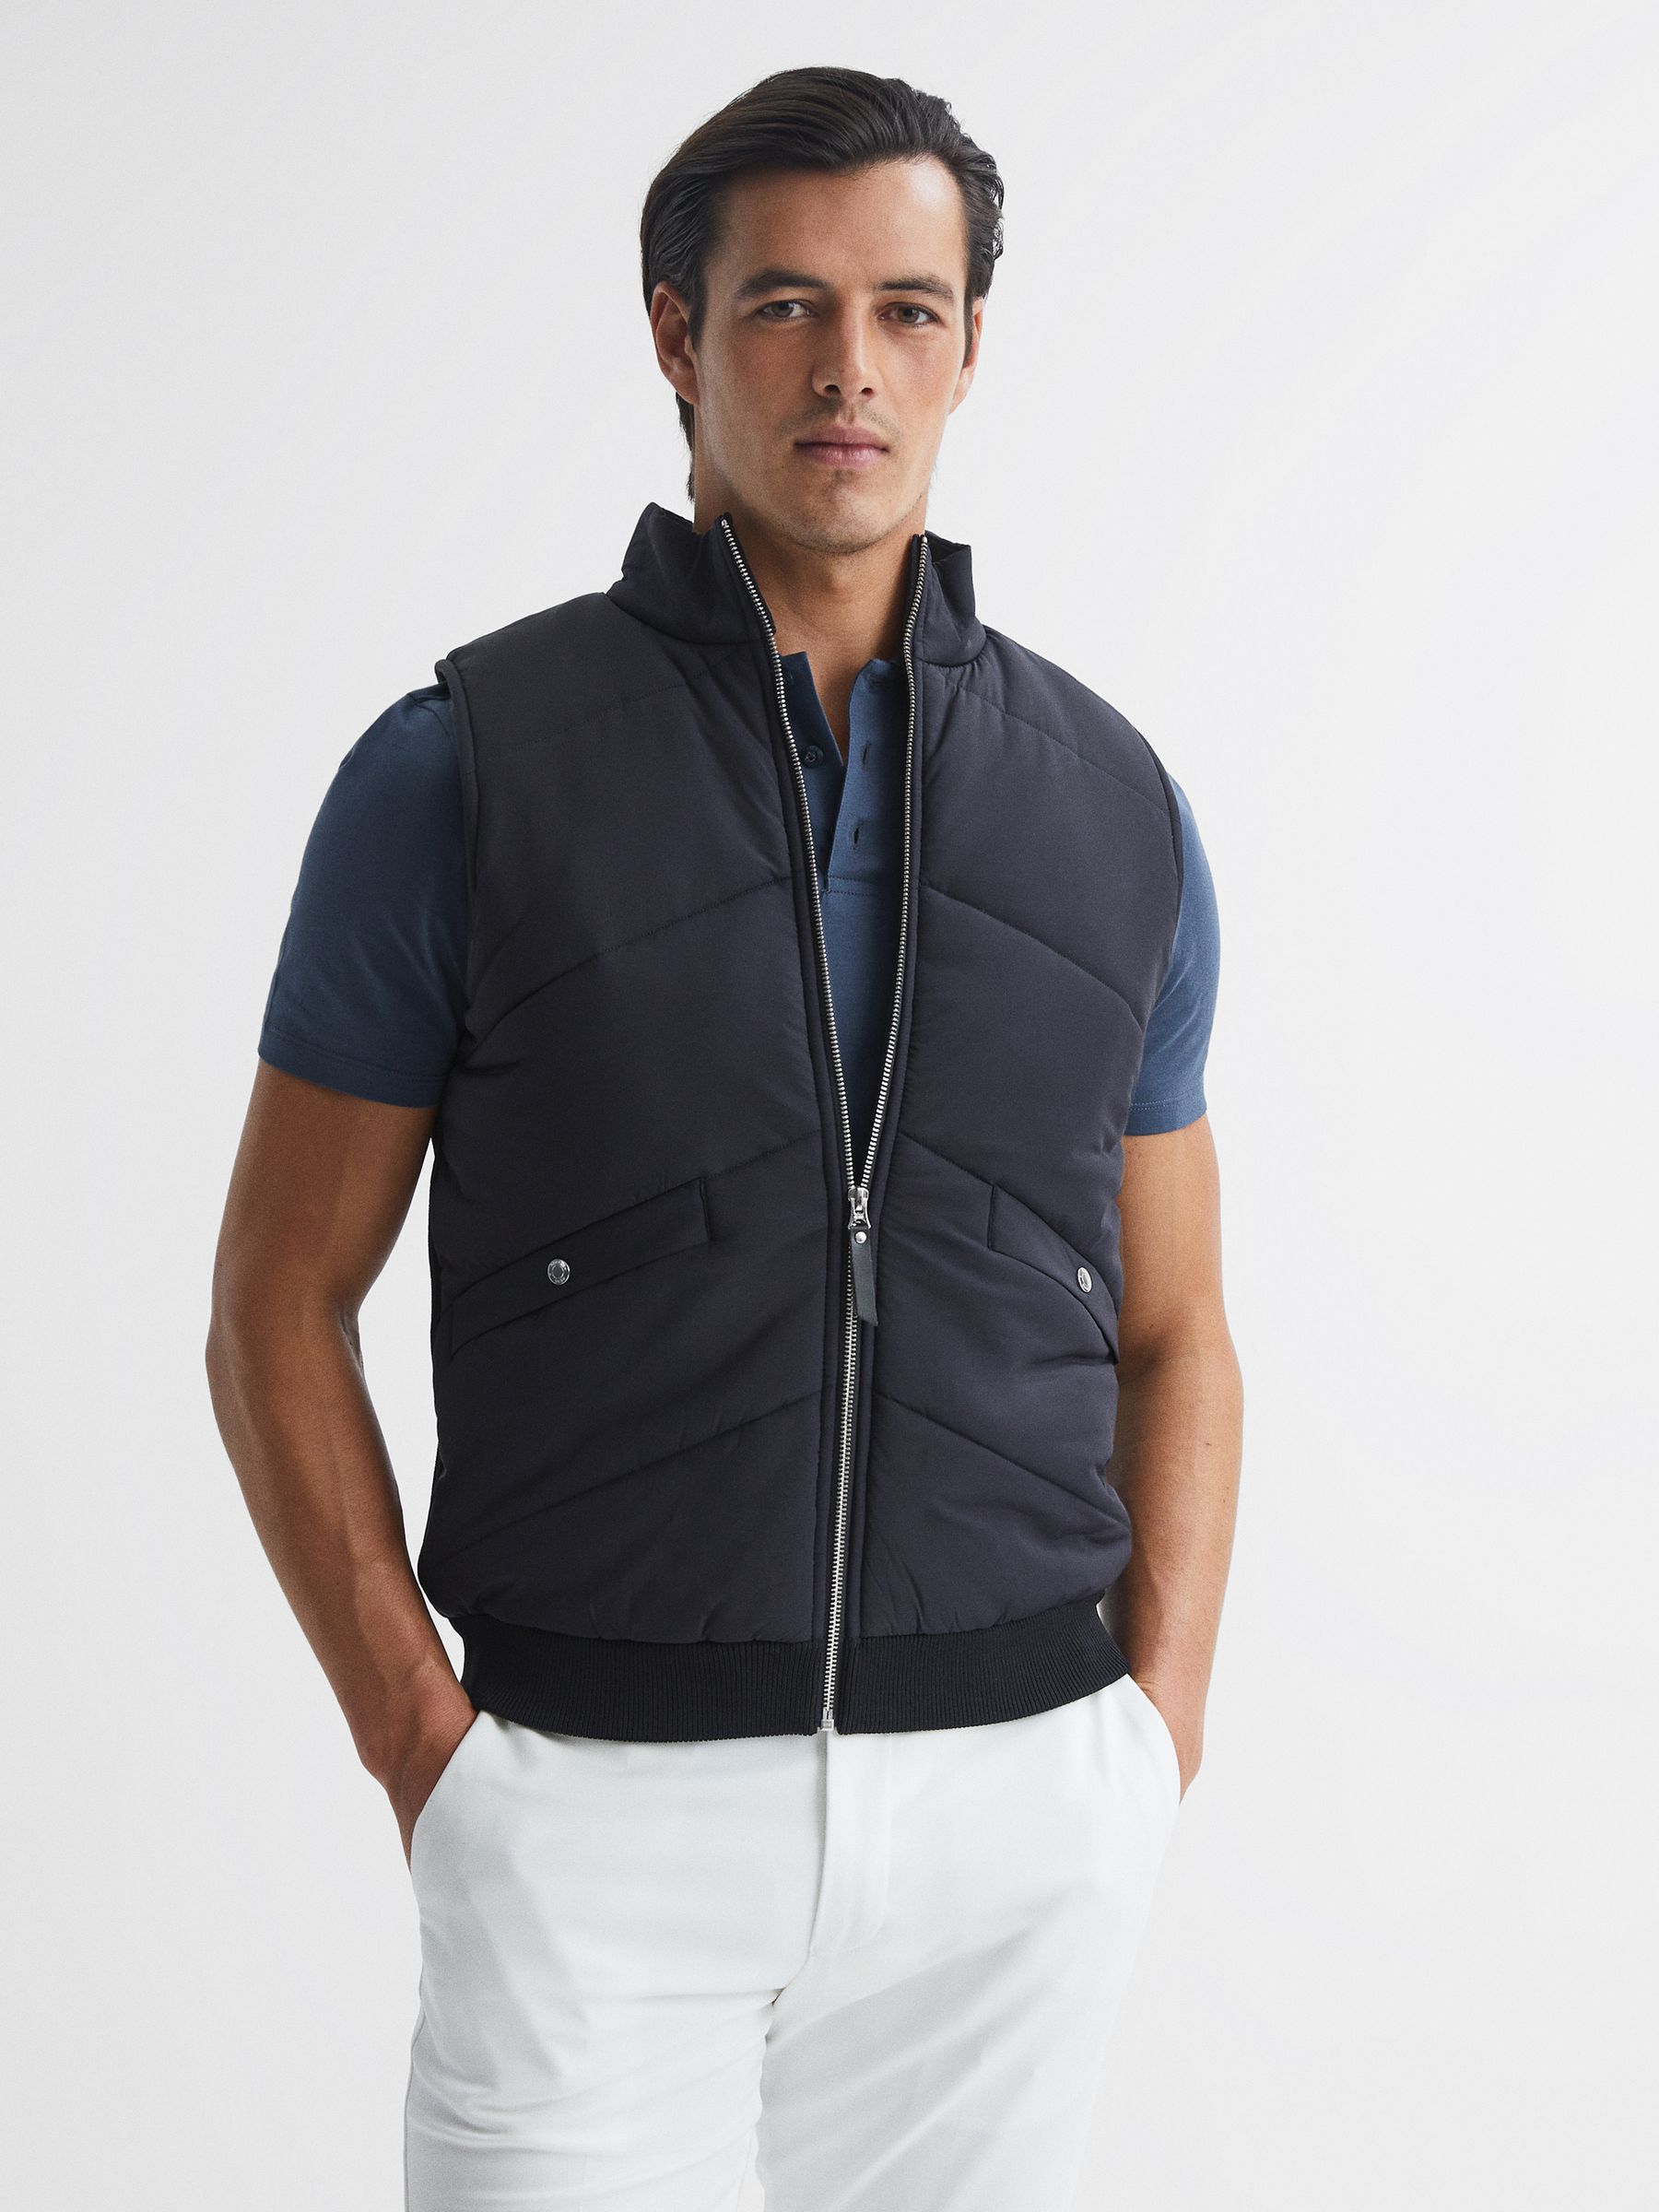 Reiss Morden Sleeveless Quilted Knitted Gilet | REISS USA